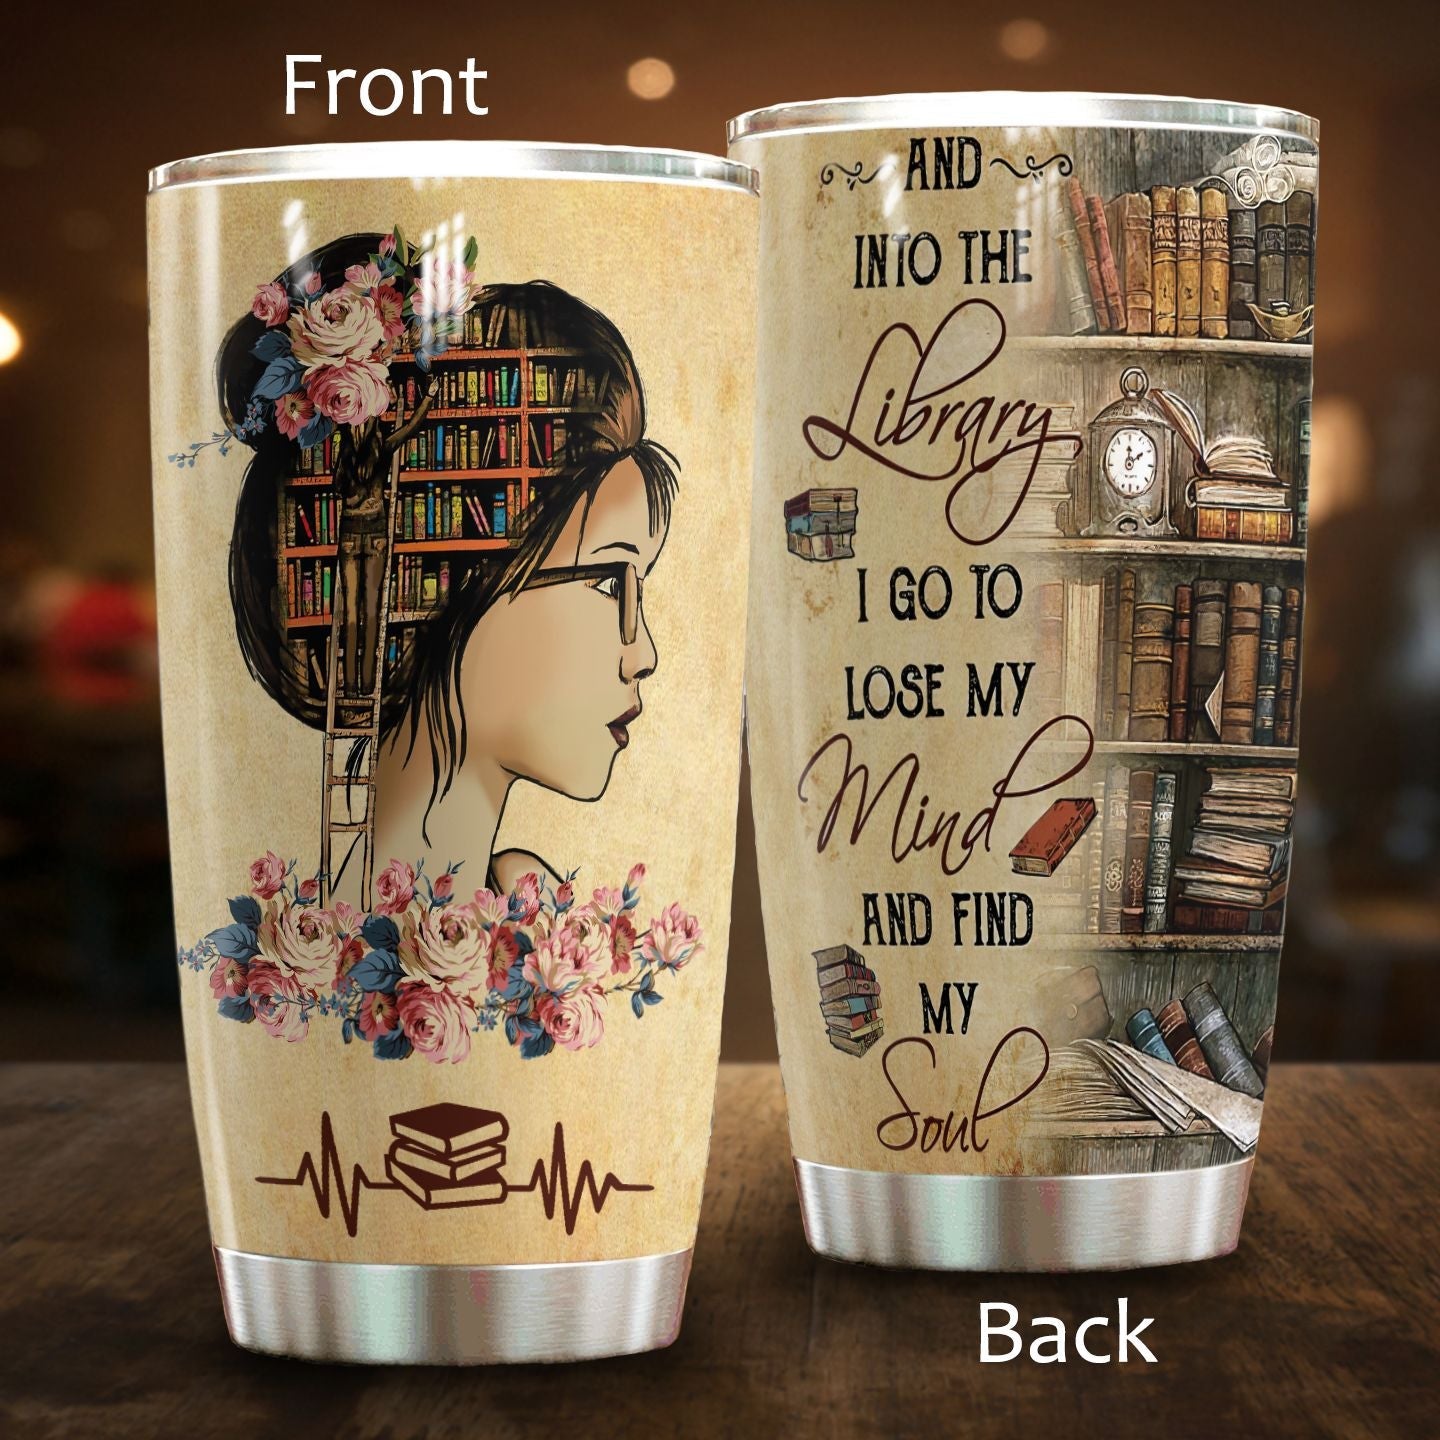  Book Tumbler Cup 20 Oz Vintage And Into The Library I Go To Lose My Mind And Find My Soul Tumbler 20 Oz